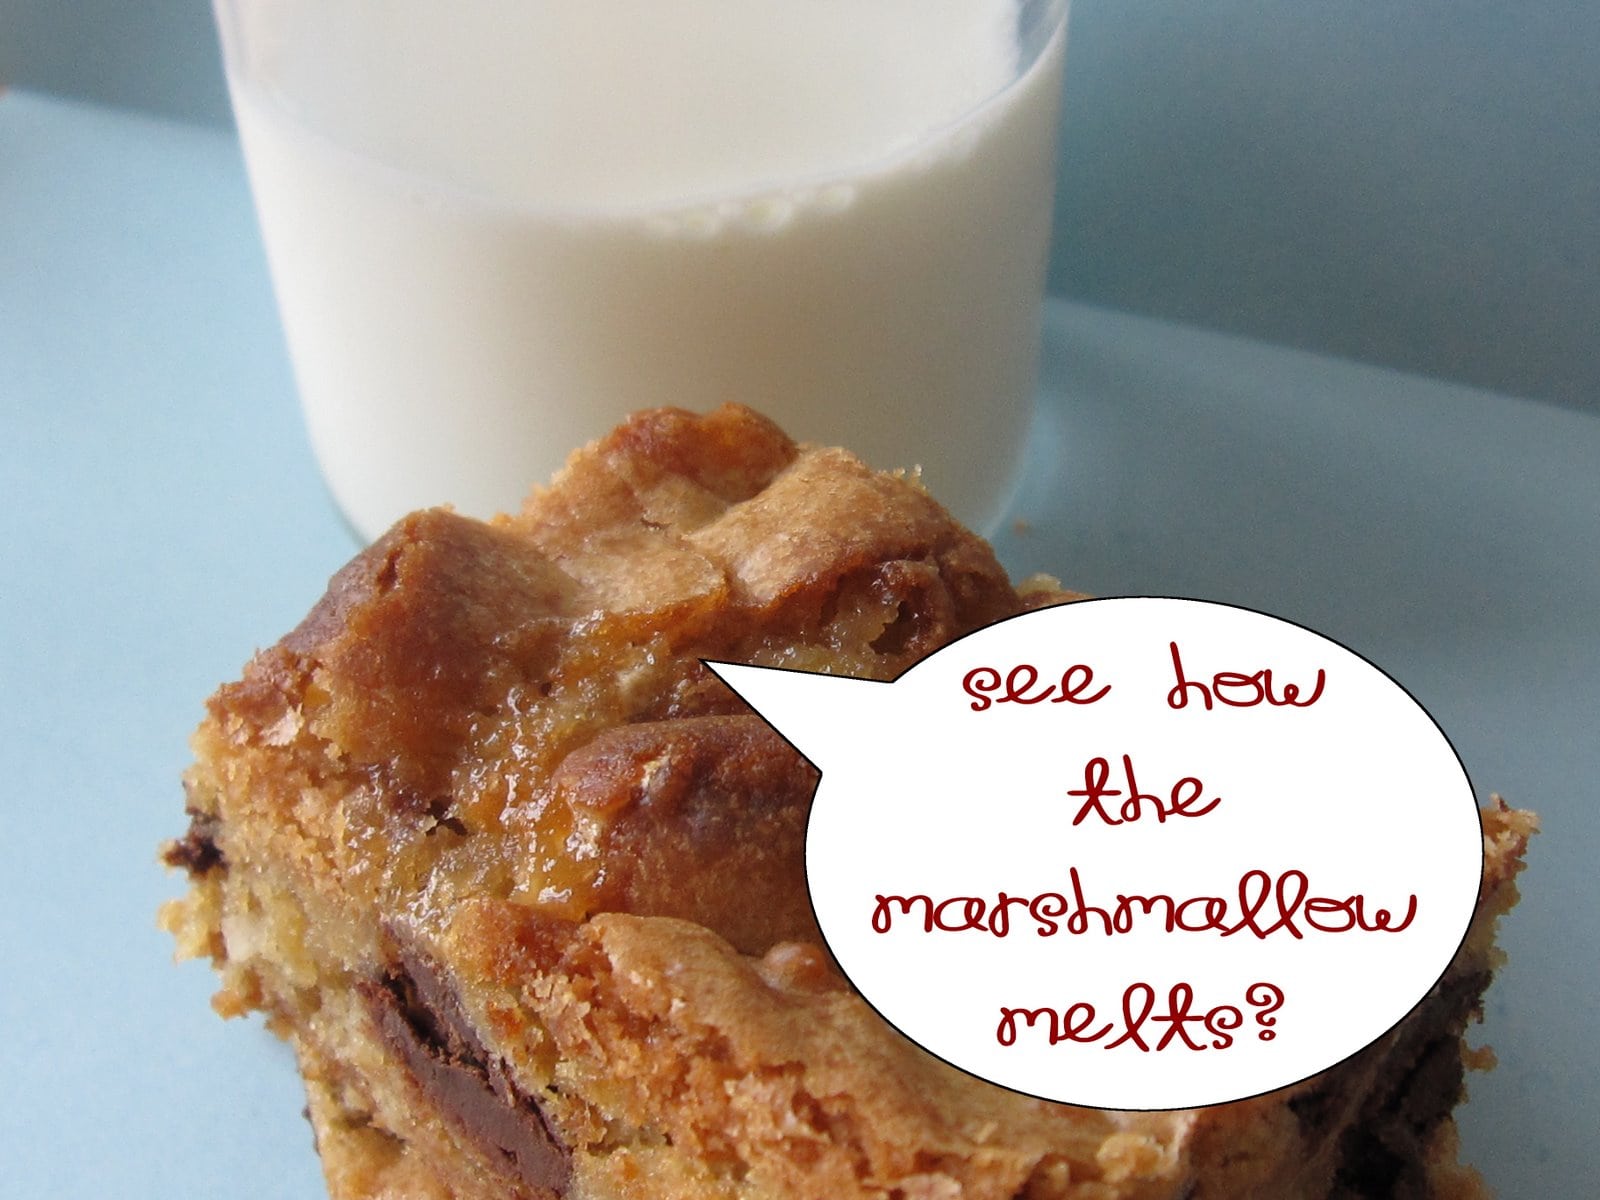 A blondie with a glass of milk and a word bubble "See how the marshmallow melts?"